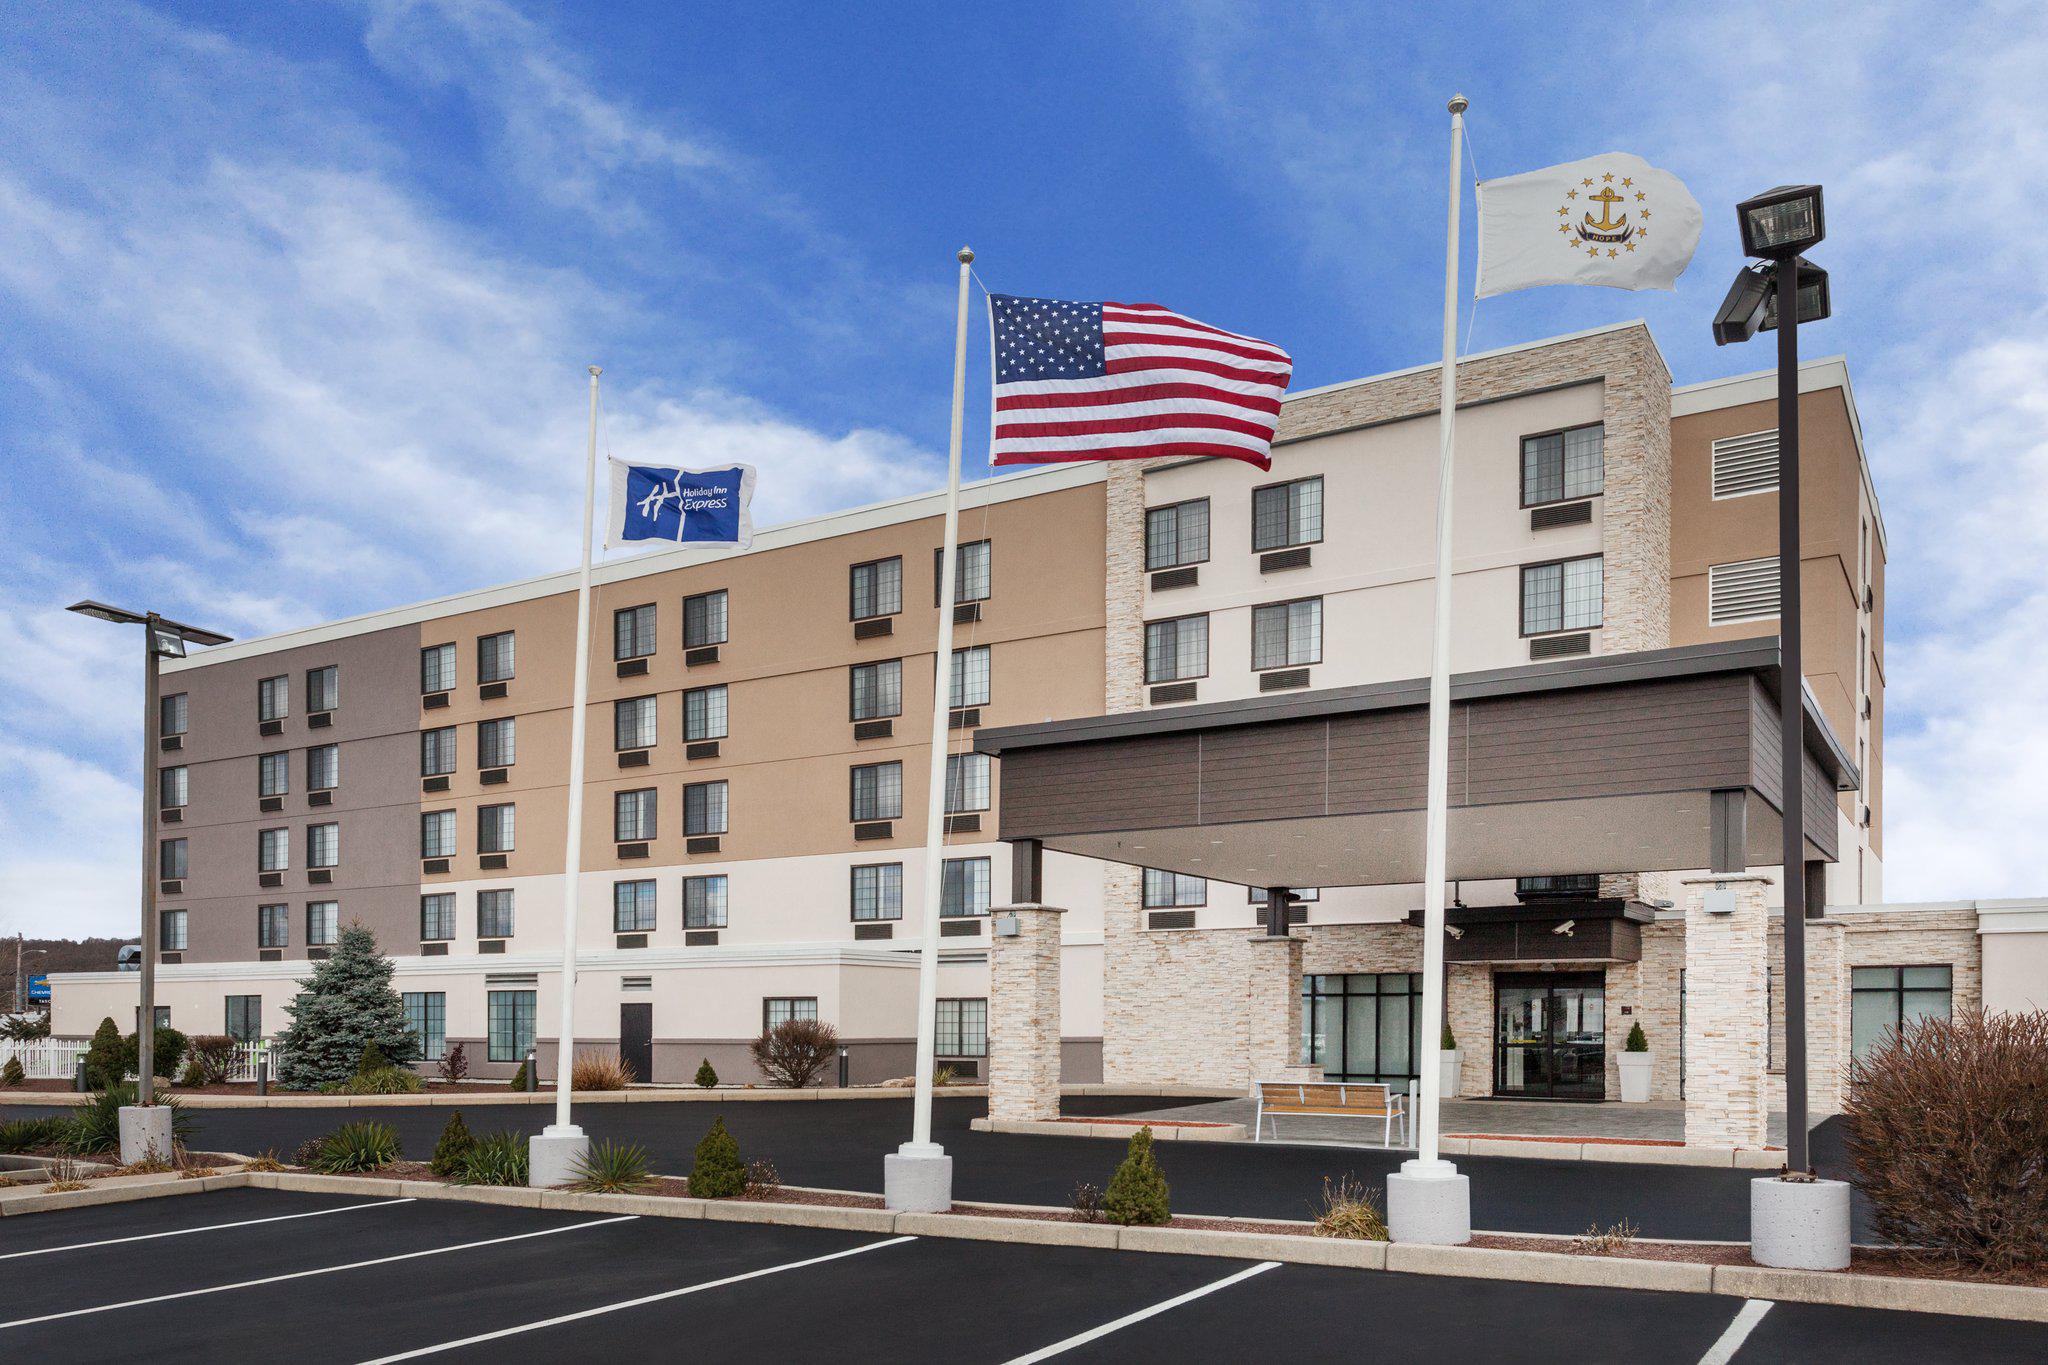 Holiday Inn Express & Suites Providence-Woonsocket Photo